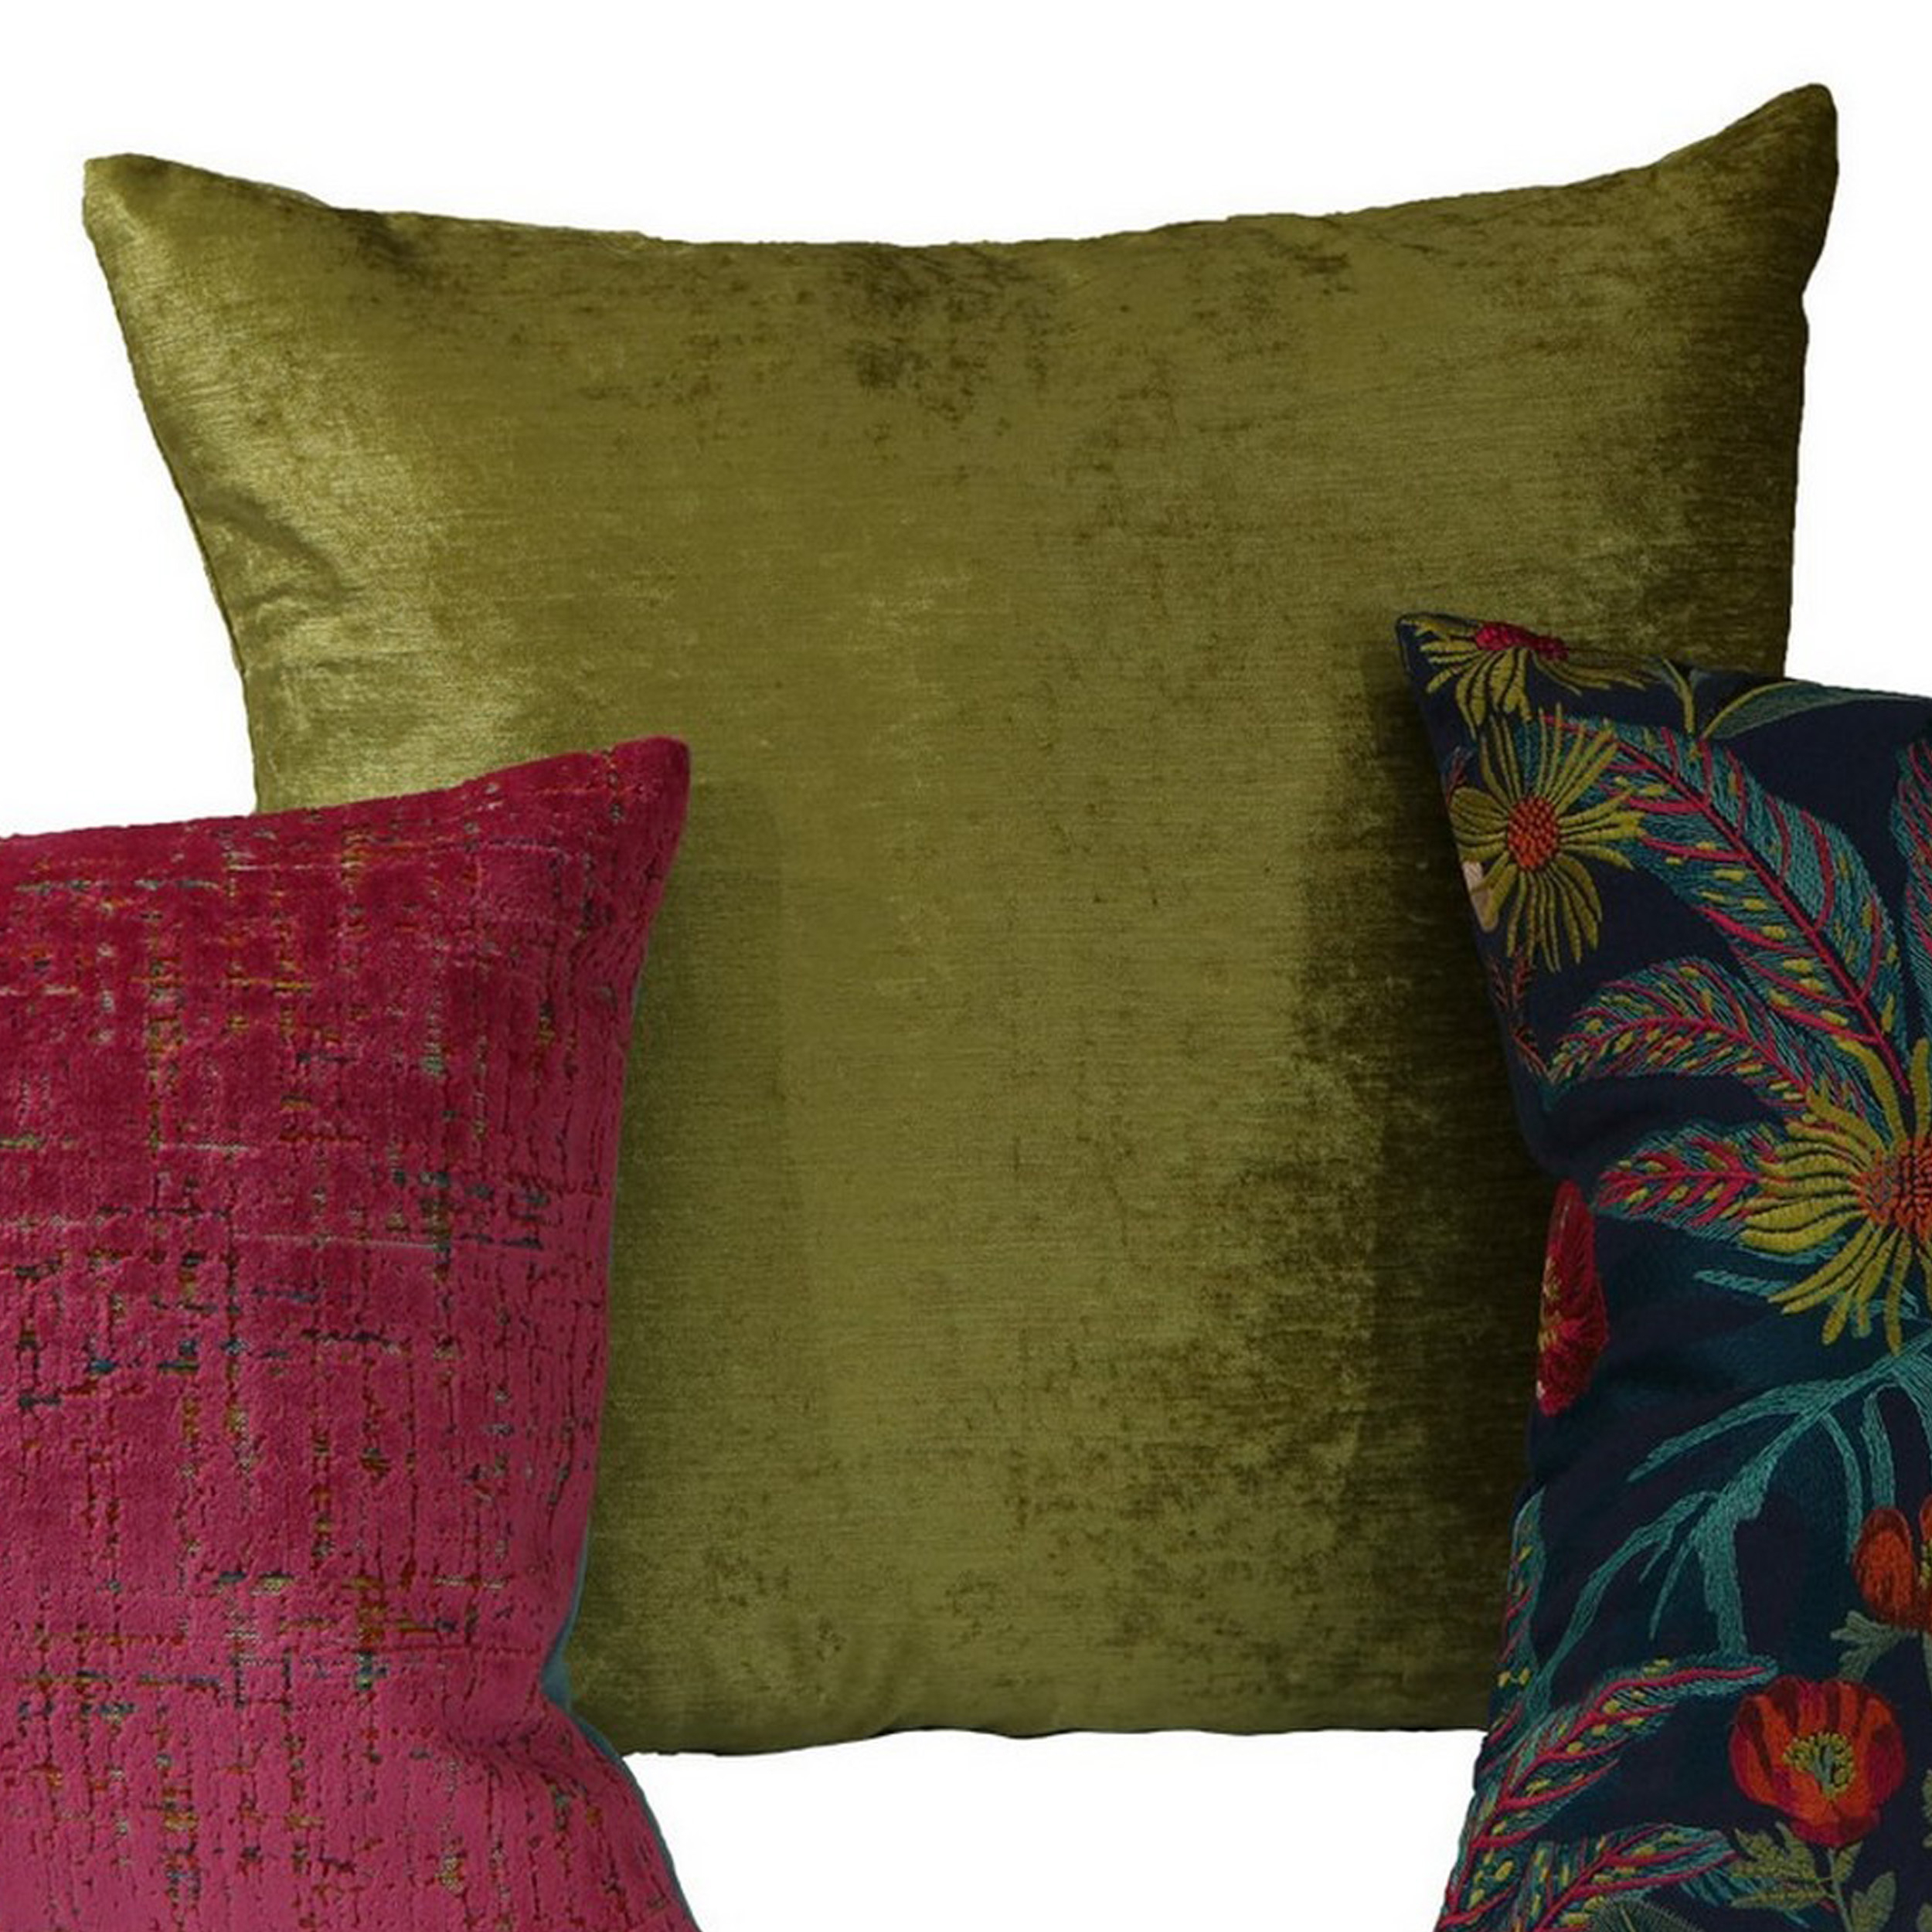 Jill 3 Colorful Accent Throw Pillow Set, Chenille, Botanical Embroidery - Saltoro Sherpi